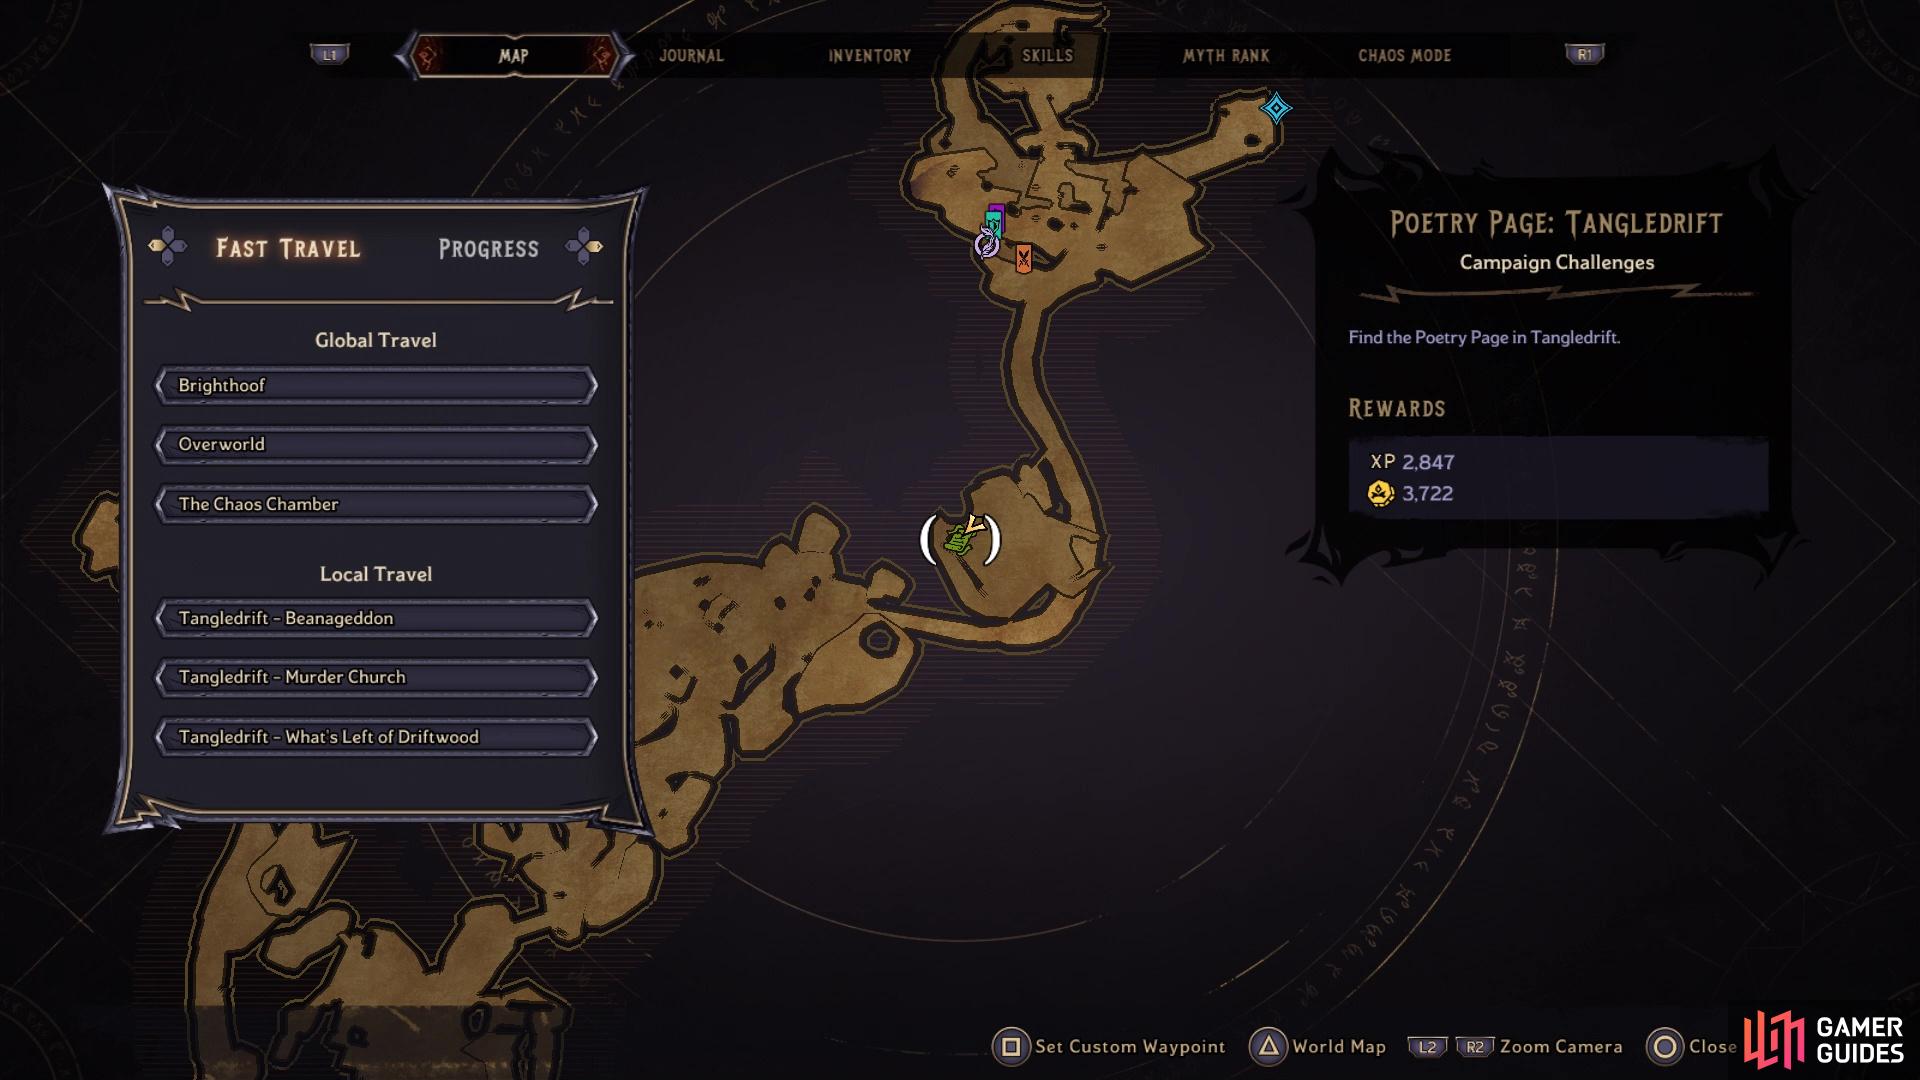 The Poetry Page located on the map